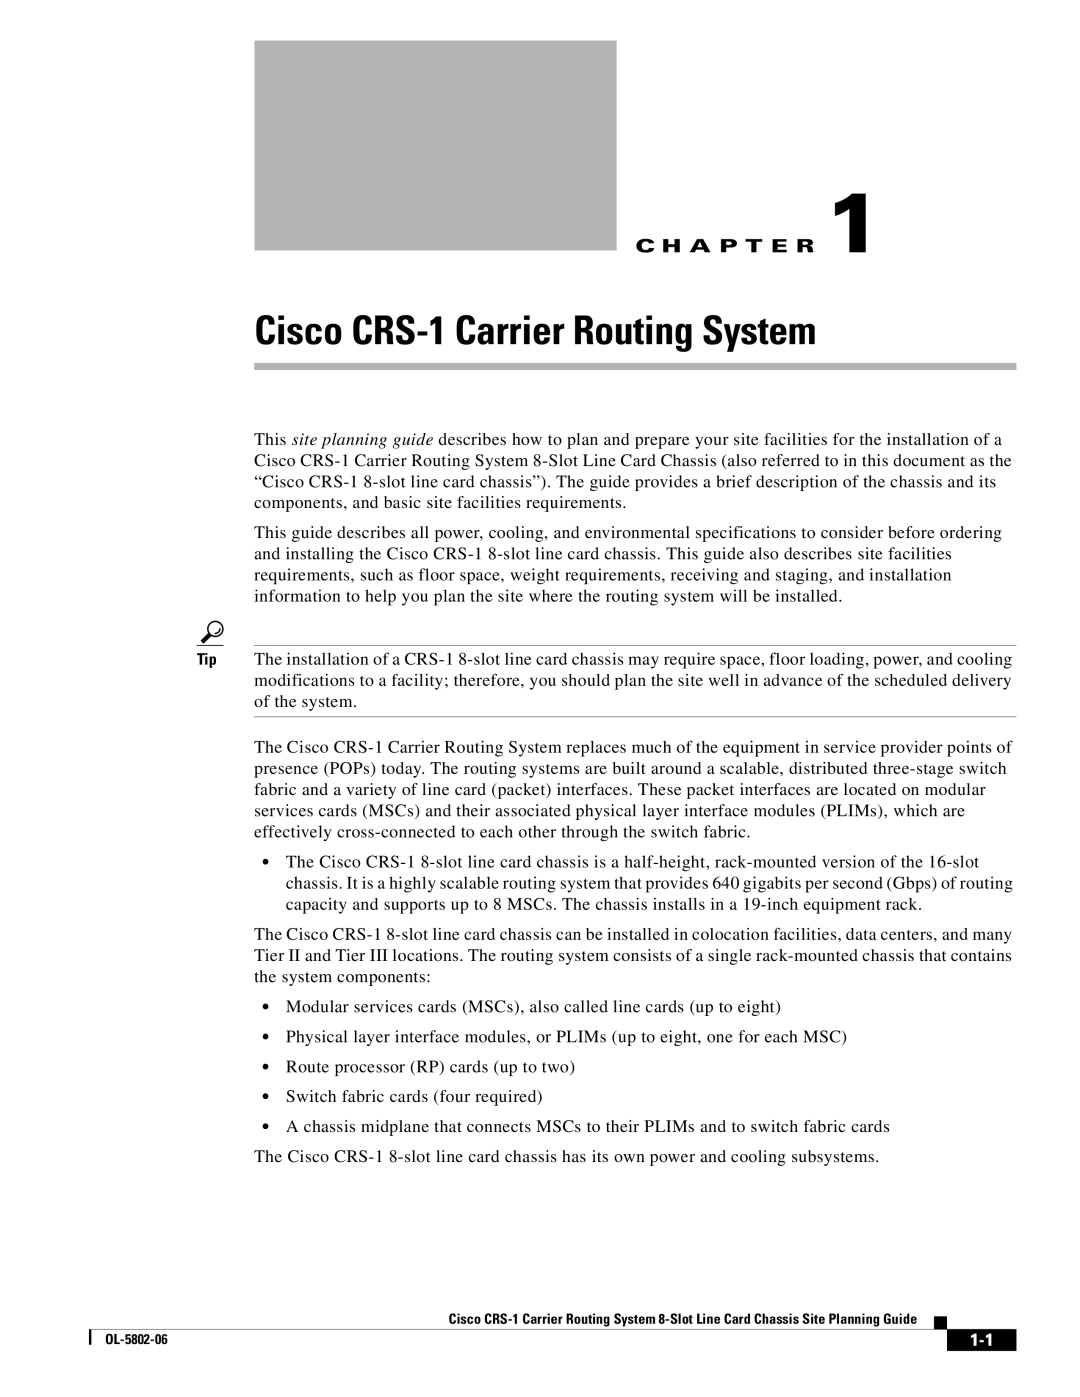 Cisco Systems manual Americas Headquarters, Cisco CRS-1Carrier Routing System 8-Slot Line Card Chassis, March 